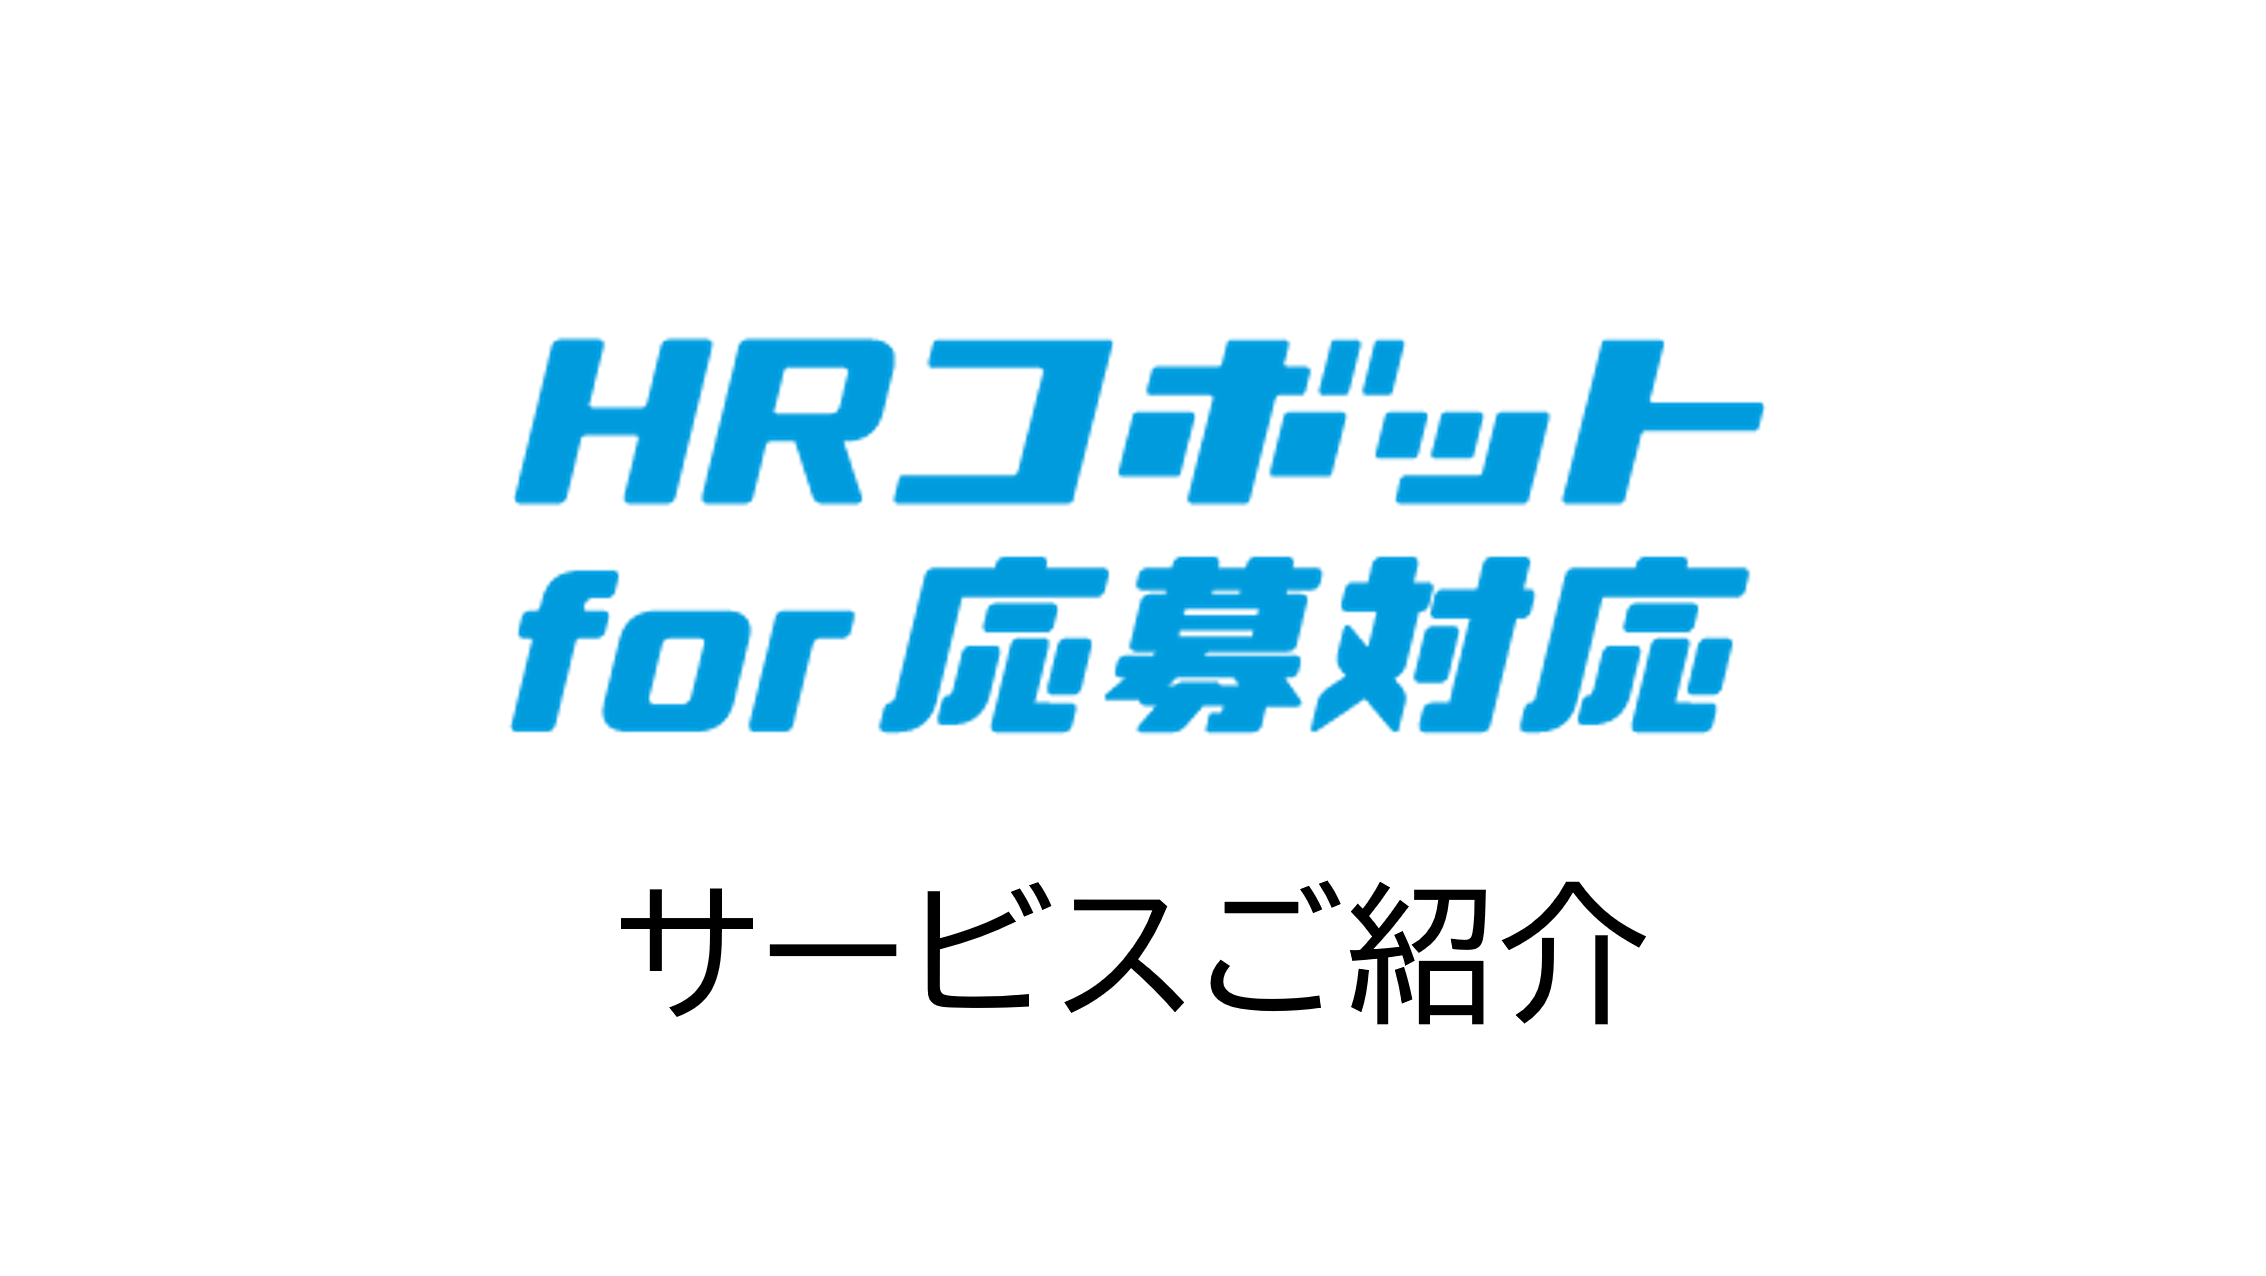 「HRコボットfor応募対応　サービス紹介」のアイキャッチ画像